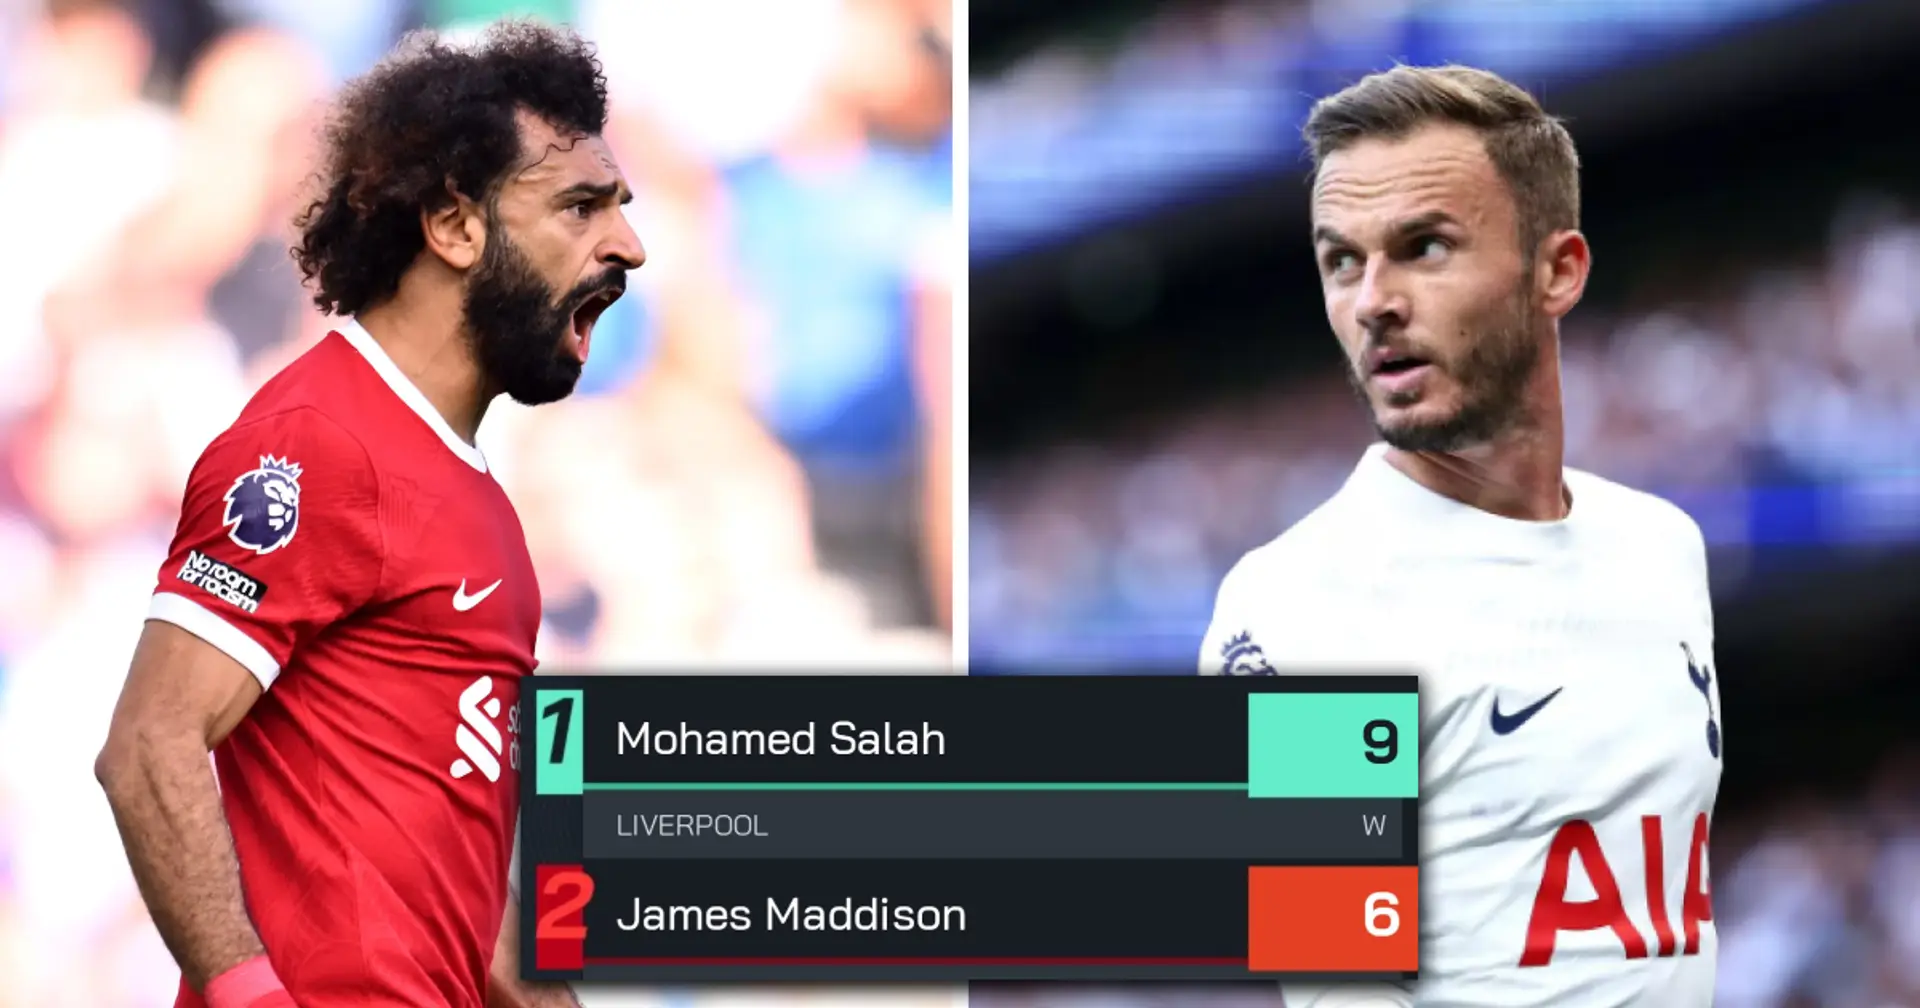 Salah leads hyped-up Maddison in key attacking stat - would be more if Diaz's goal had counted